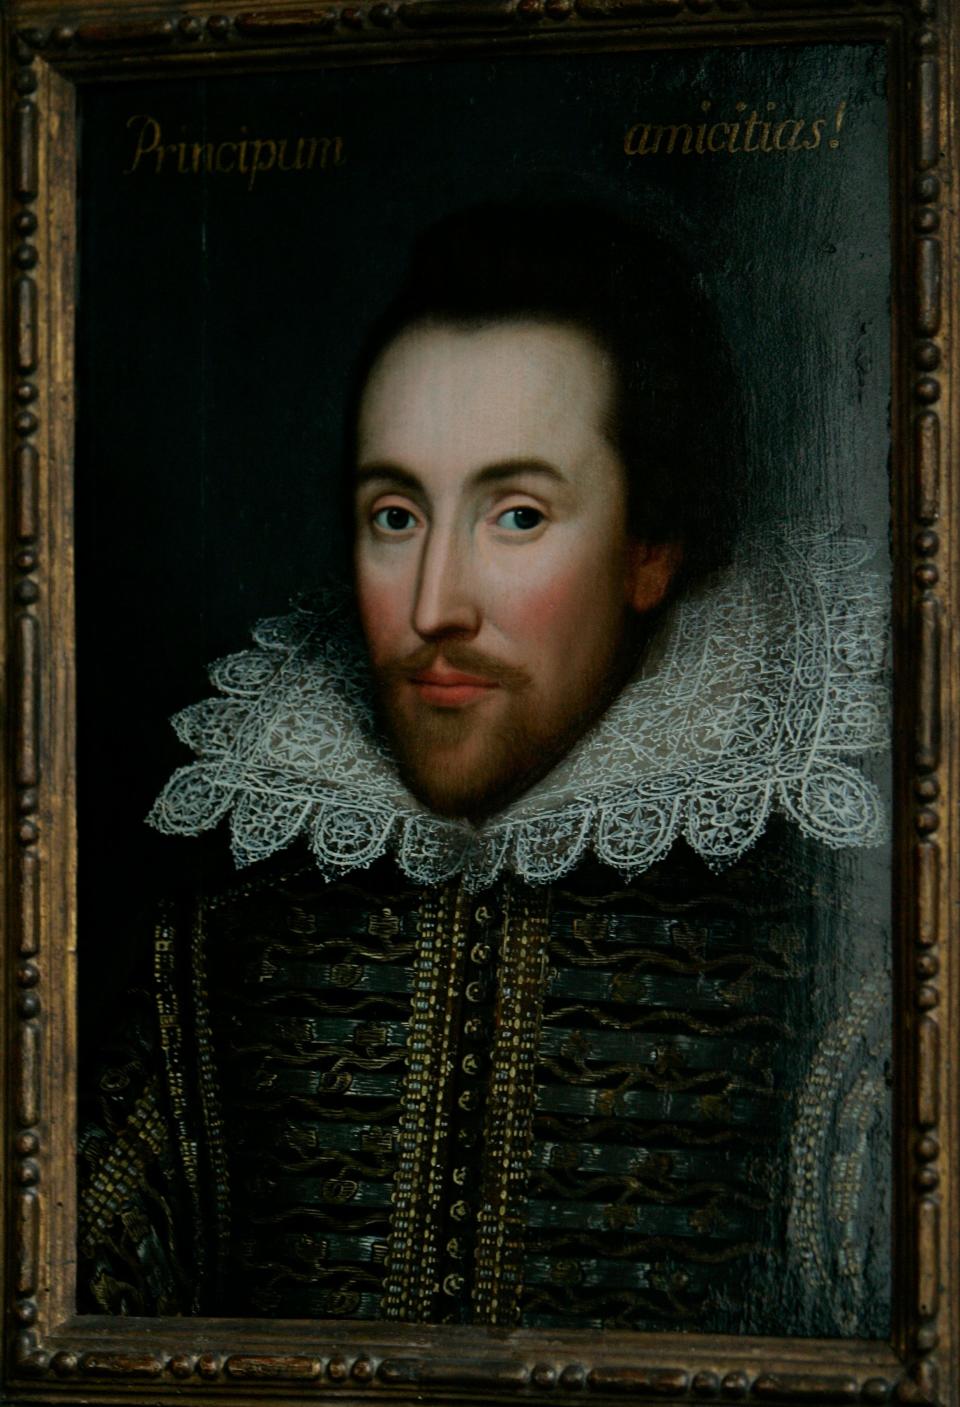 A newly discovered portrait of William Shakespeare, presented by the Shakespeare Birthplace trust, is seen in central London, Monday March 9, 2009. The portrait, believed to be almost the only authentic image of the writer made from life, has belonged to one family for centuries but was not recognized as a portrait of Shakespeare until recently. There are very few likenesses of Shakespeare, who died in 1616.